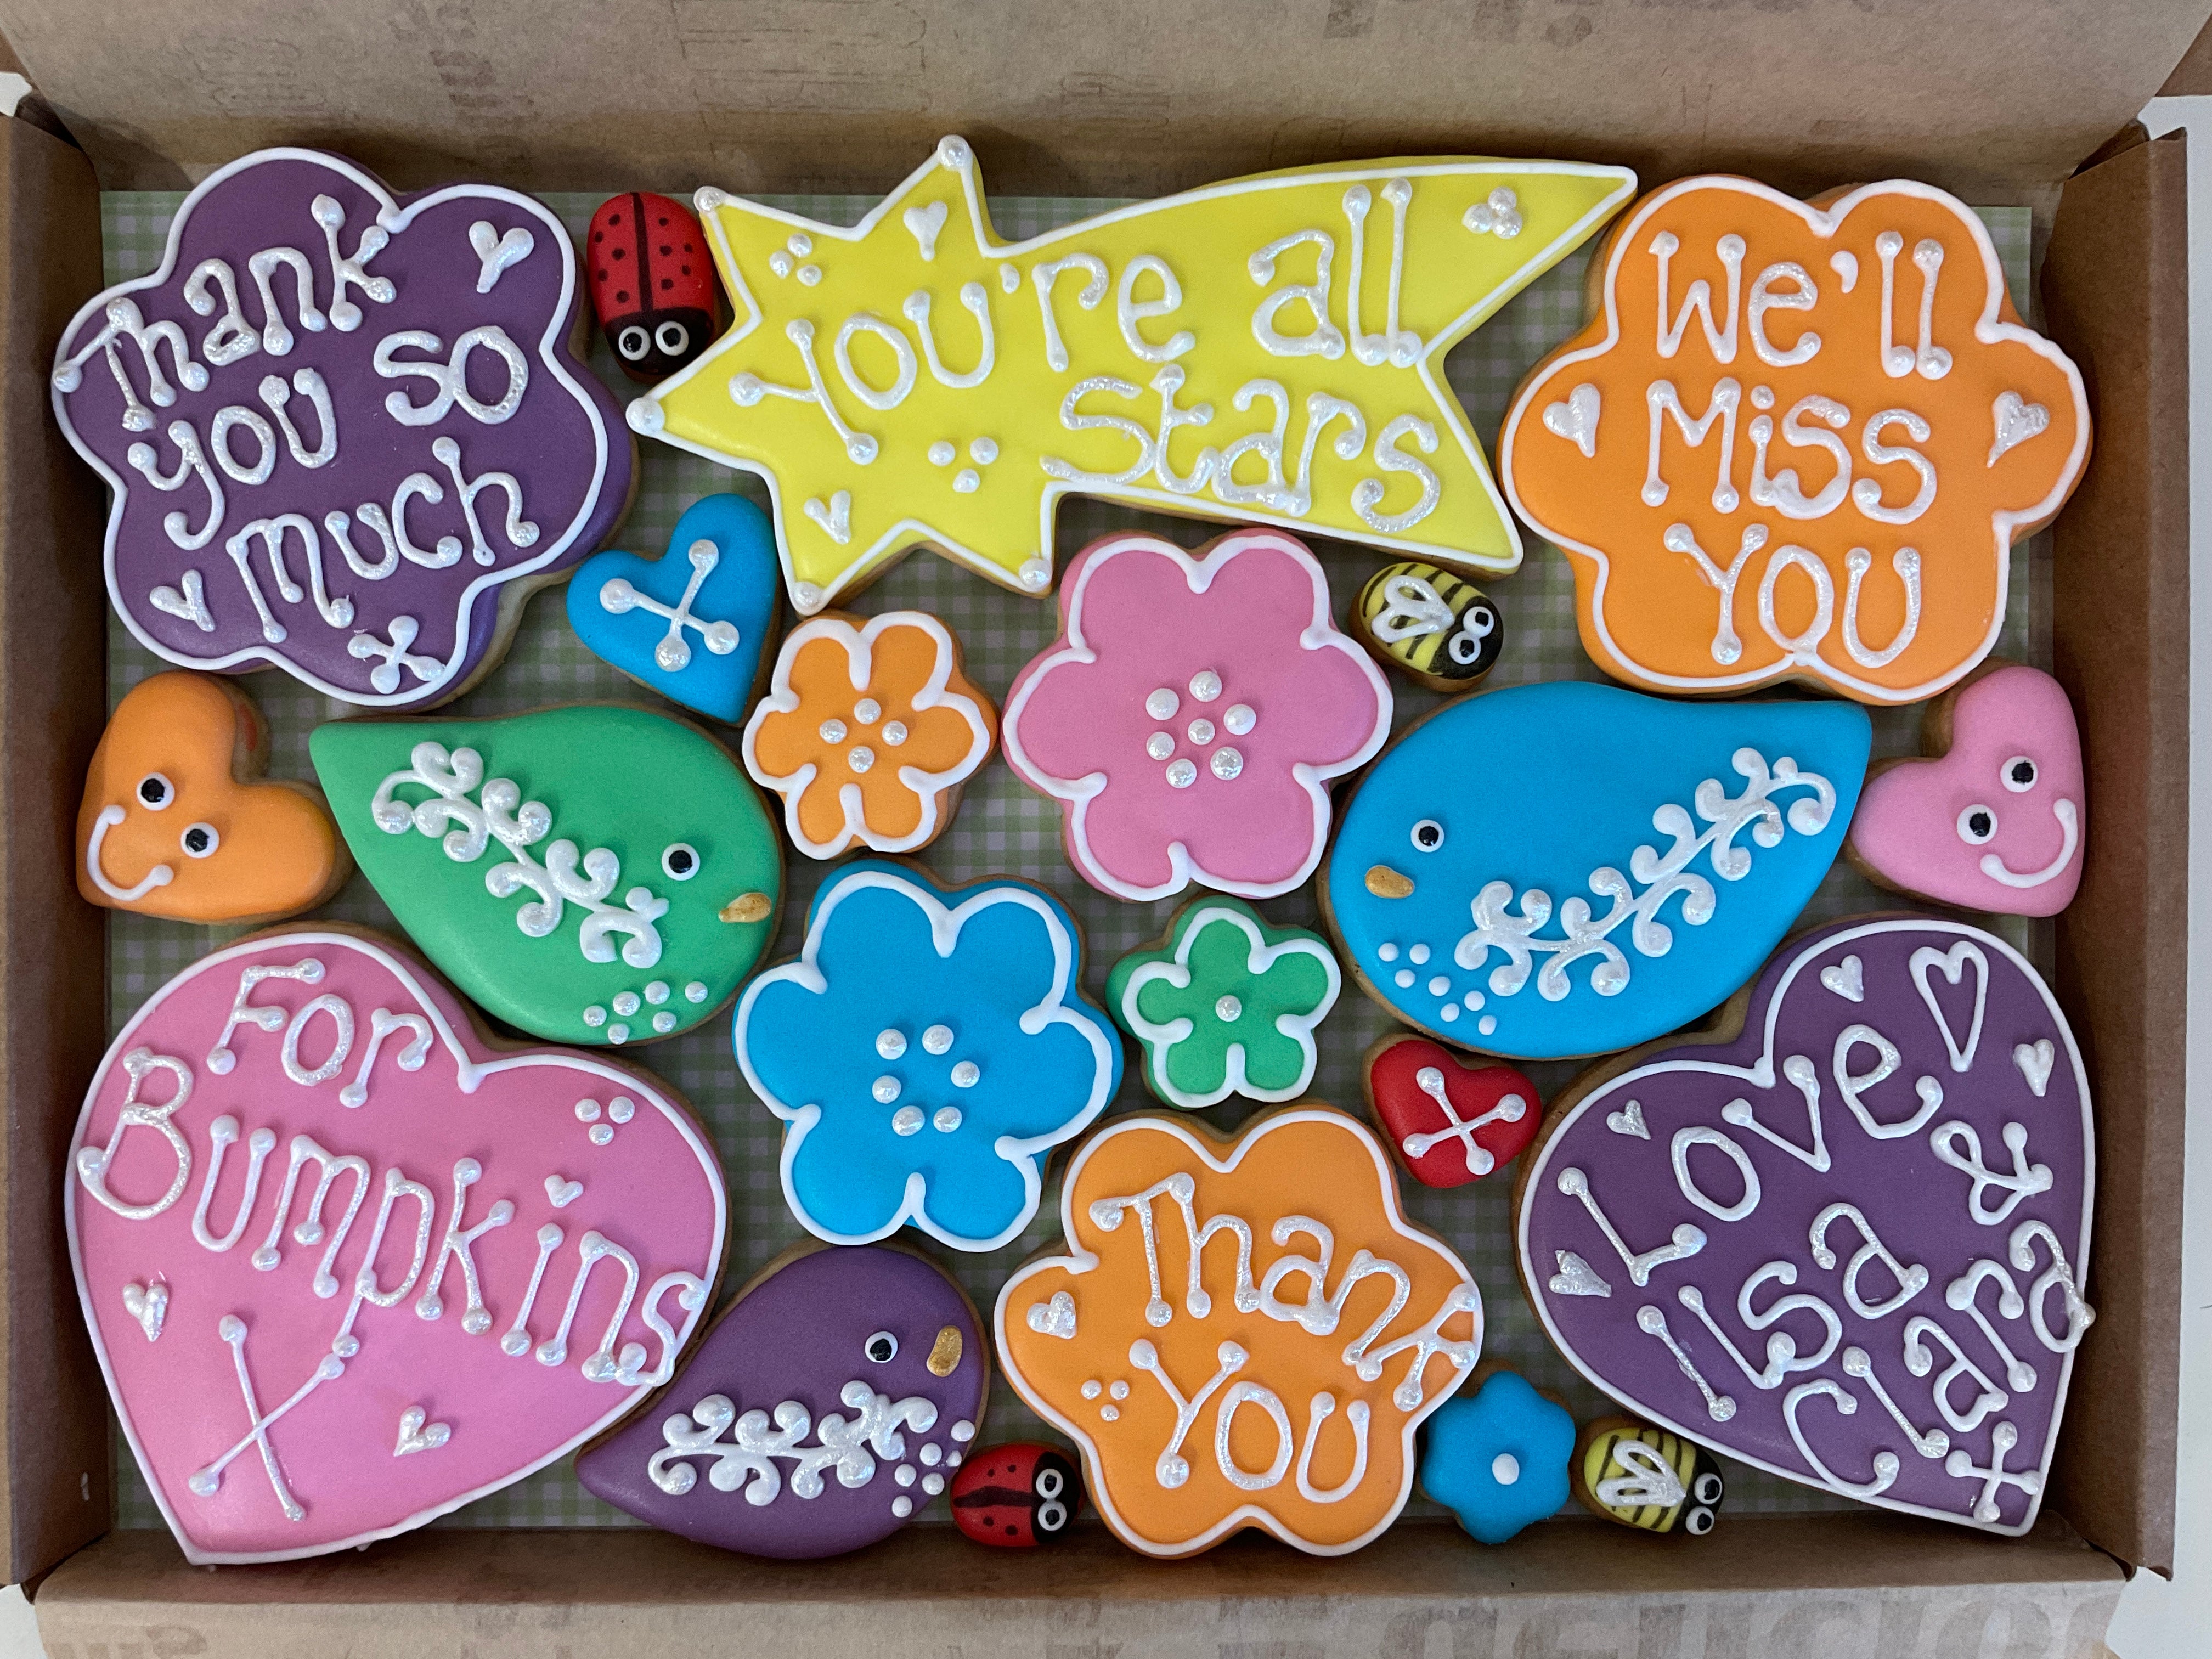 Thank You Cookie Box (Large)